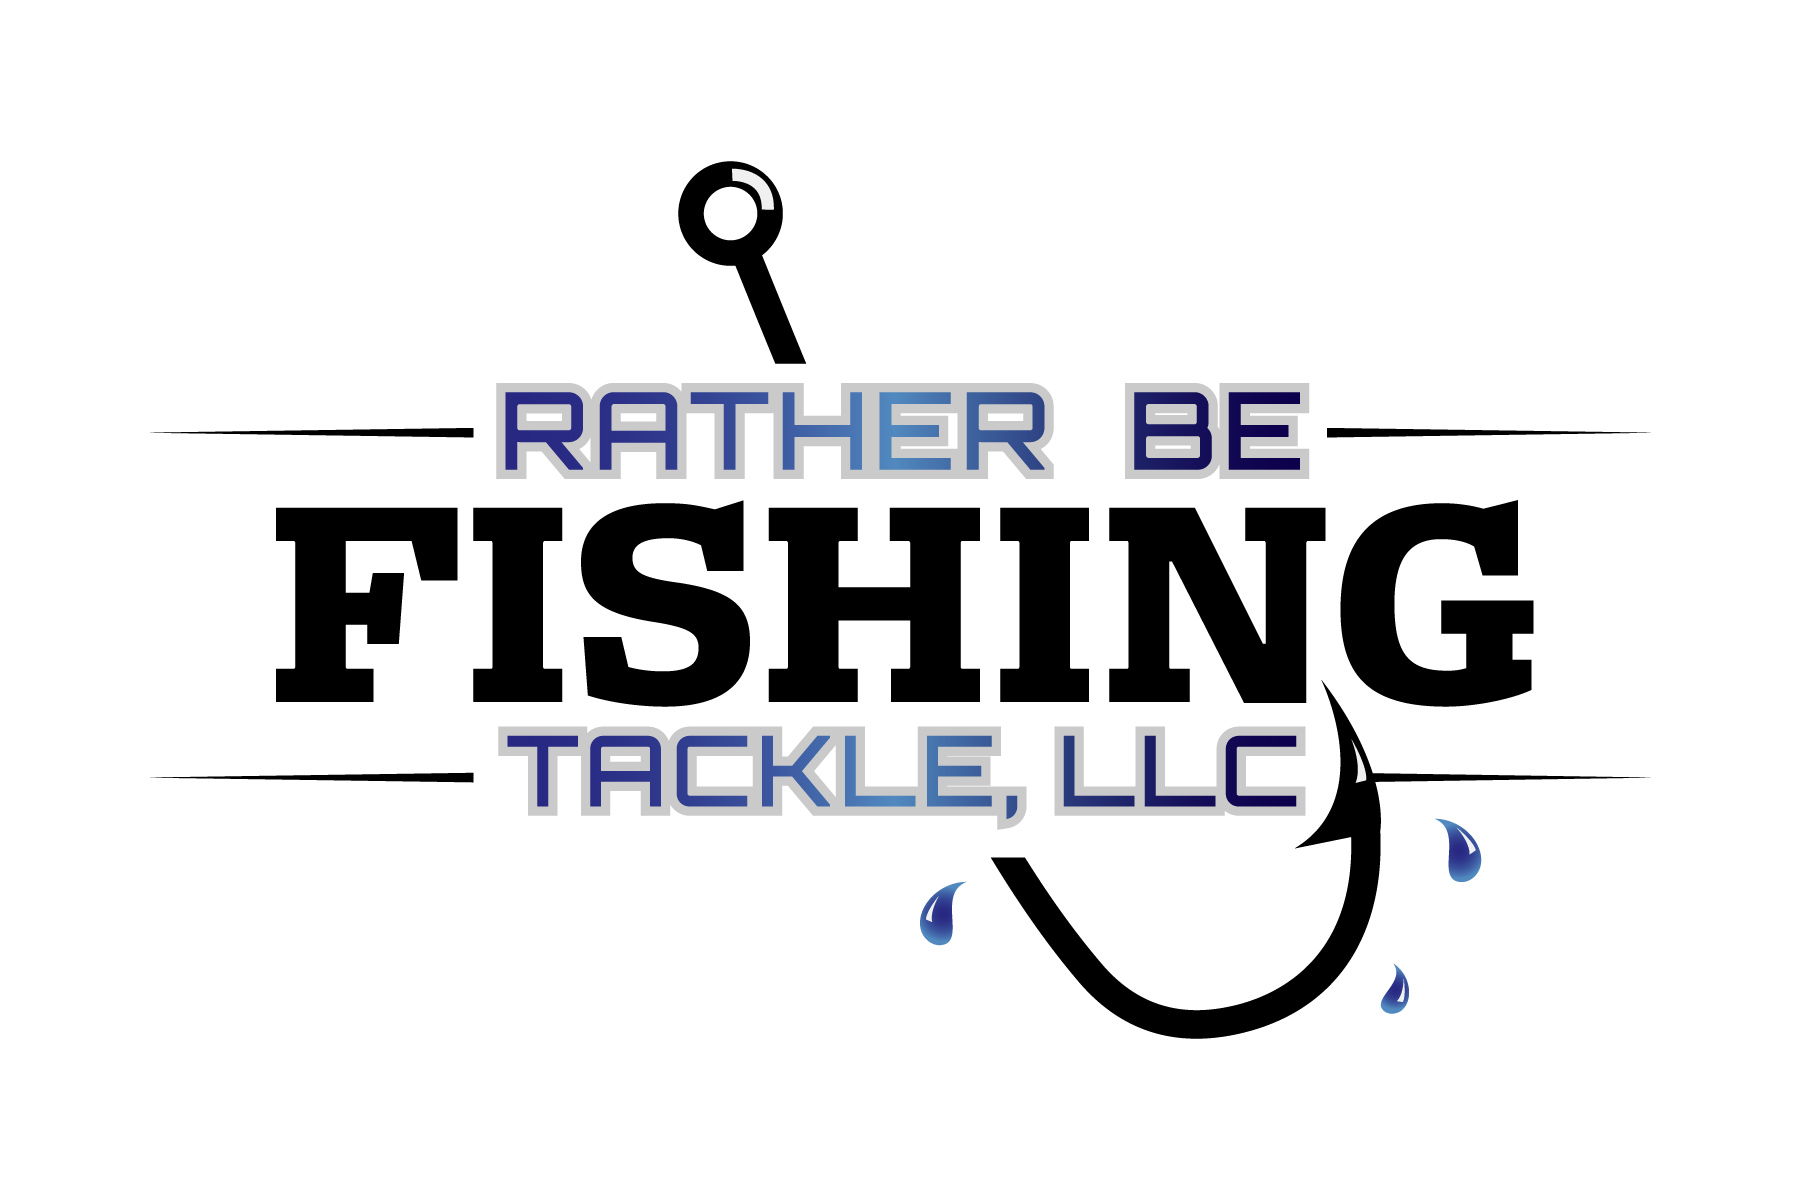 Rather Be Fishing Tackle, LLC